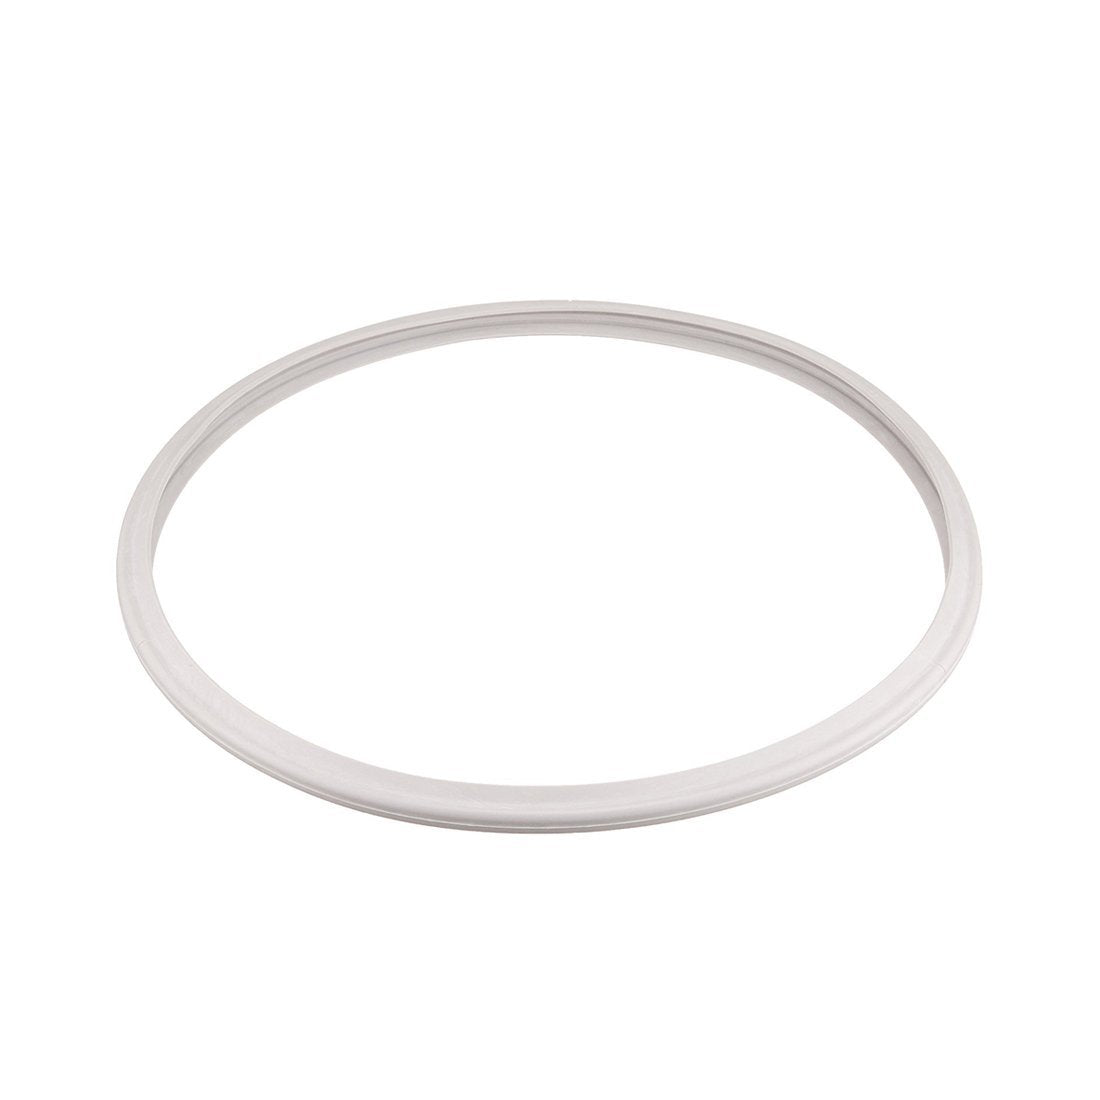 Buffalo Commercial Stainless Steel Pressure Cooker Gasket - 16L/21L/30L